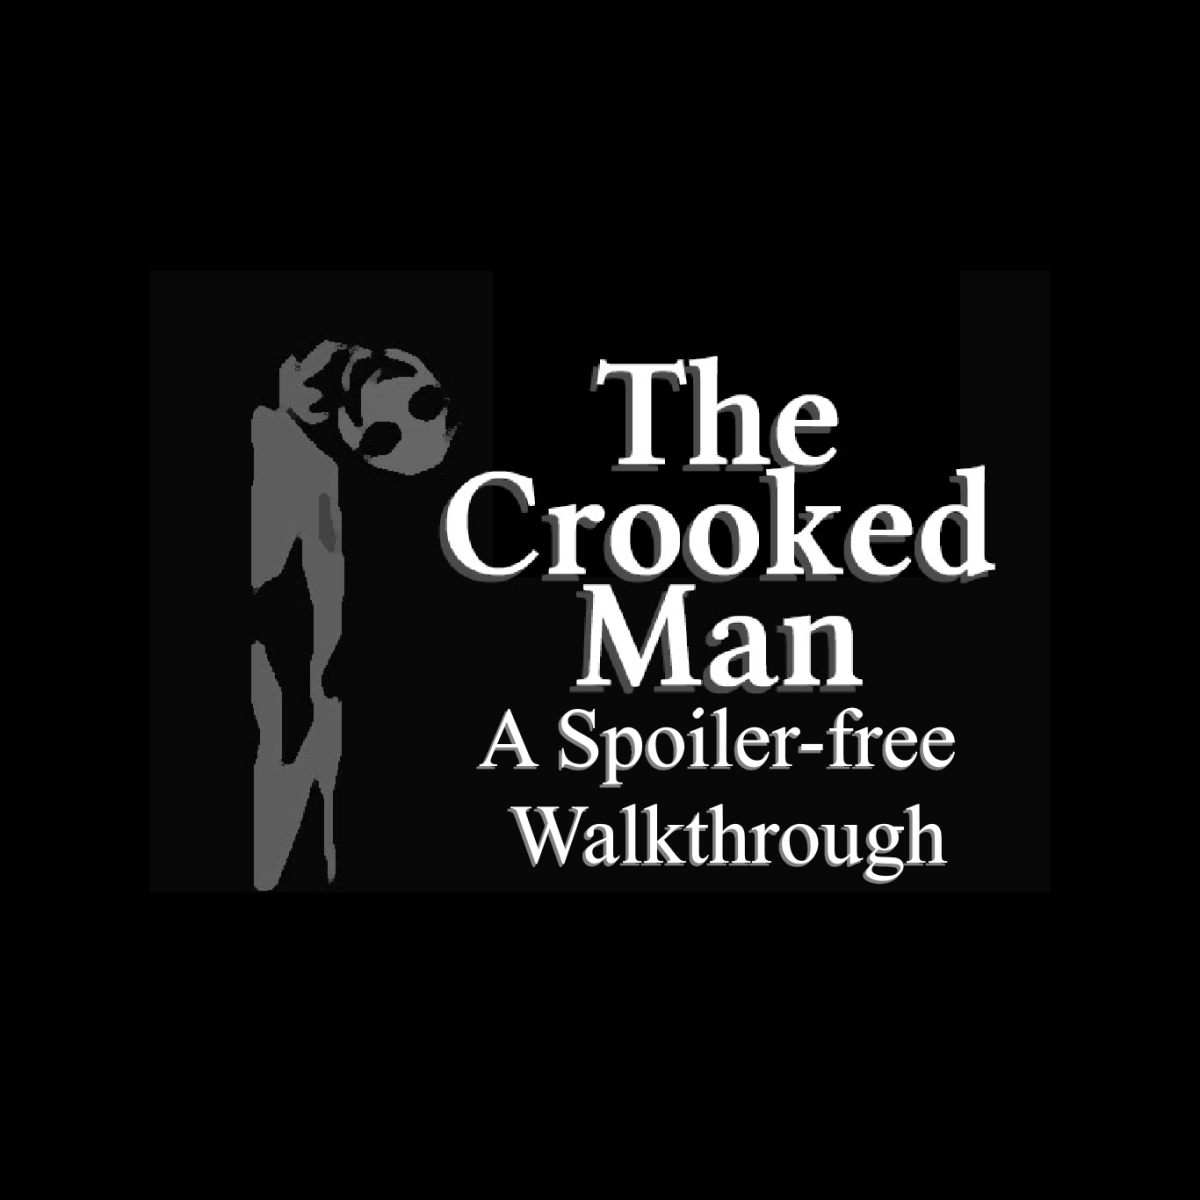 Learn all about "The Crooked Man" in this spoiler-free walkthrough. 